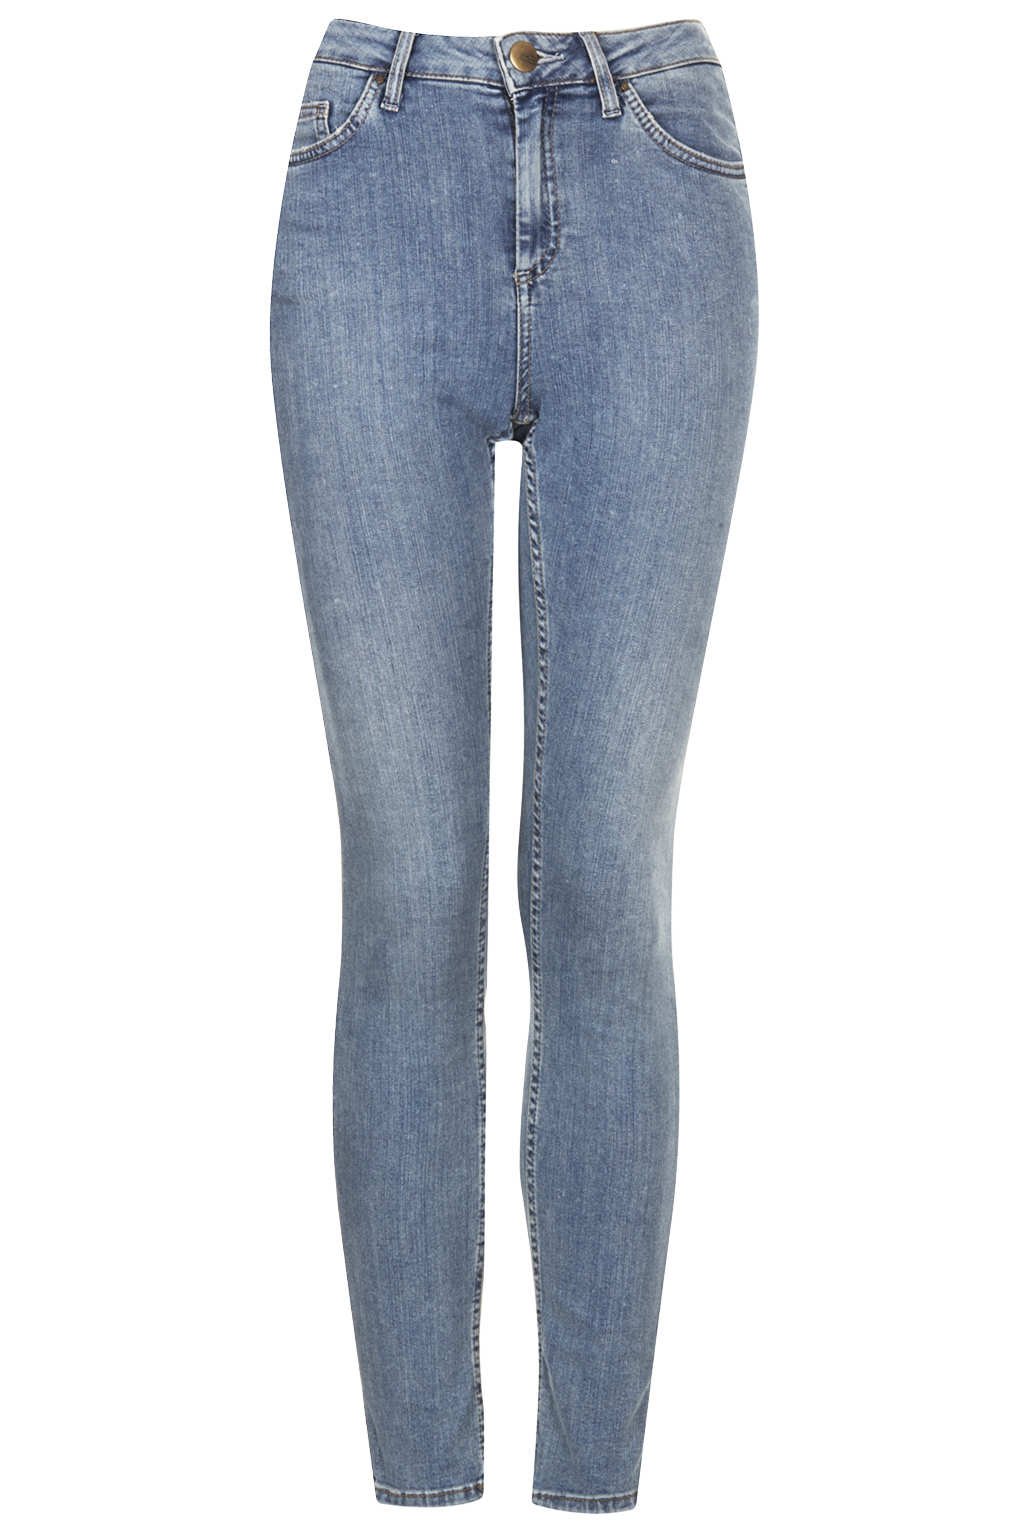 Topshop Moto Light Vintage Jamie High Waisted Jeans in Blue | Lyst